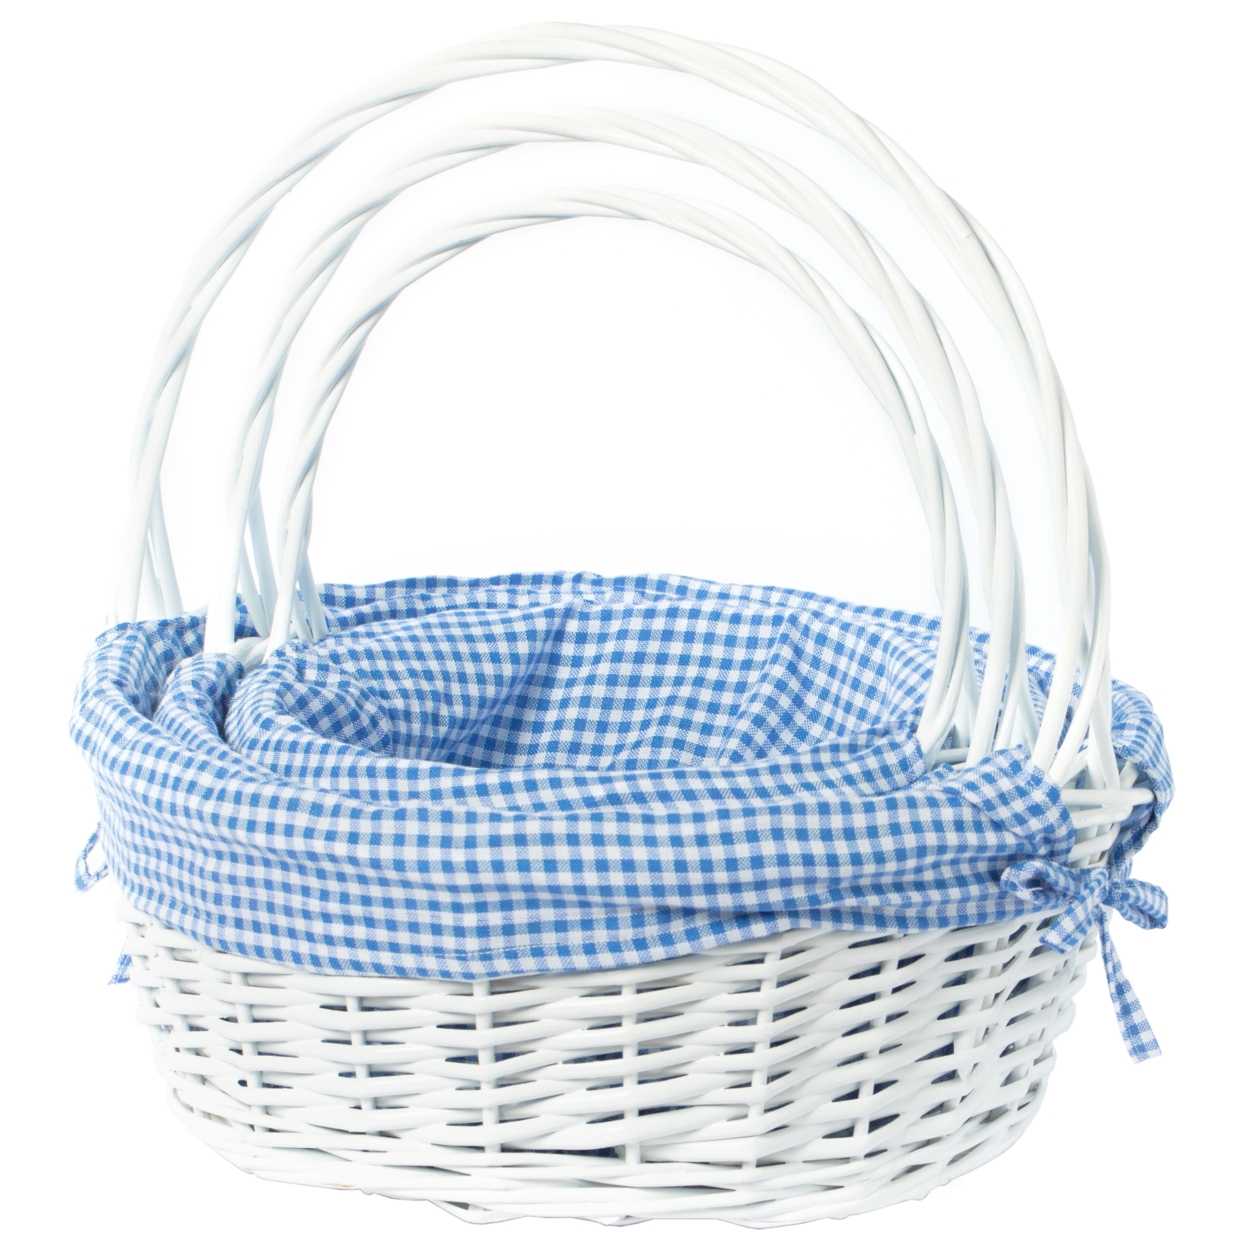 White Round Willow Gift Basket, With Blue And White Gingham Liner And Handles - Blue Medium